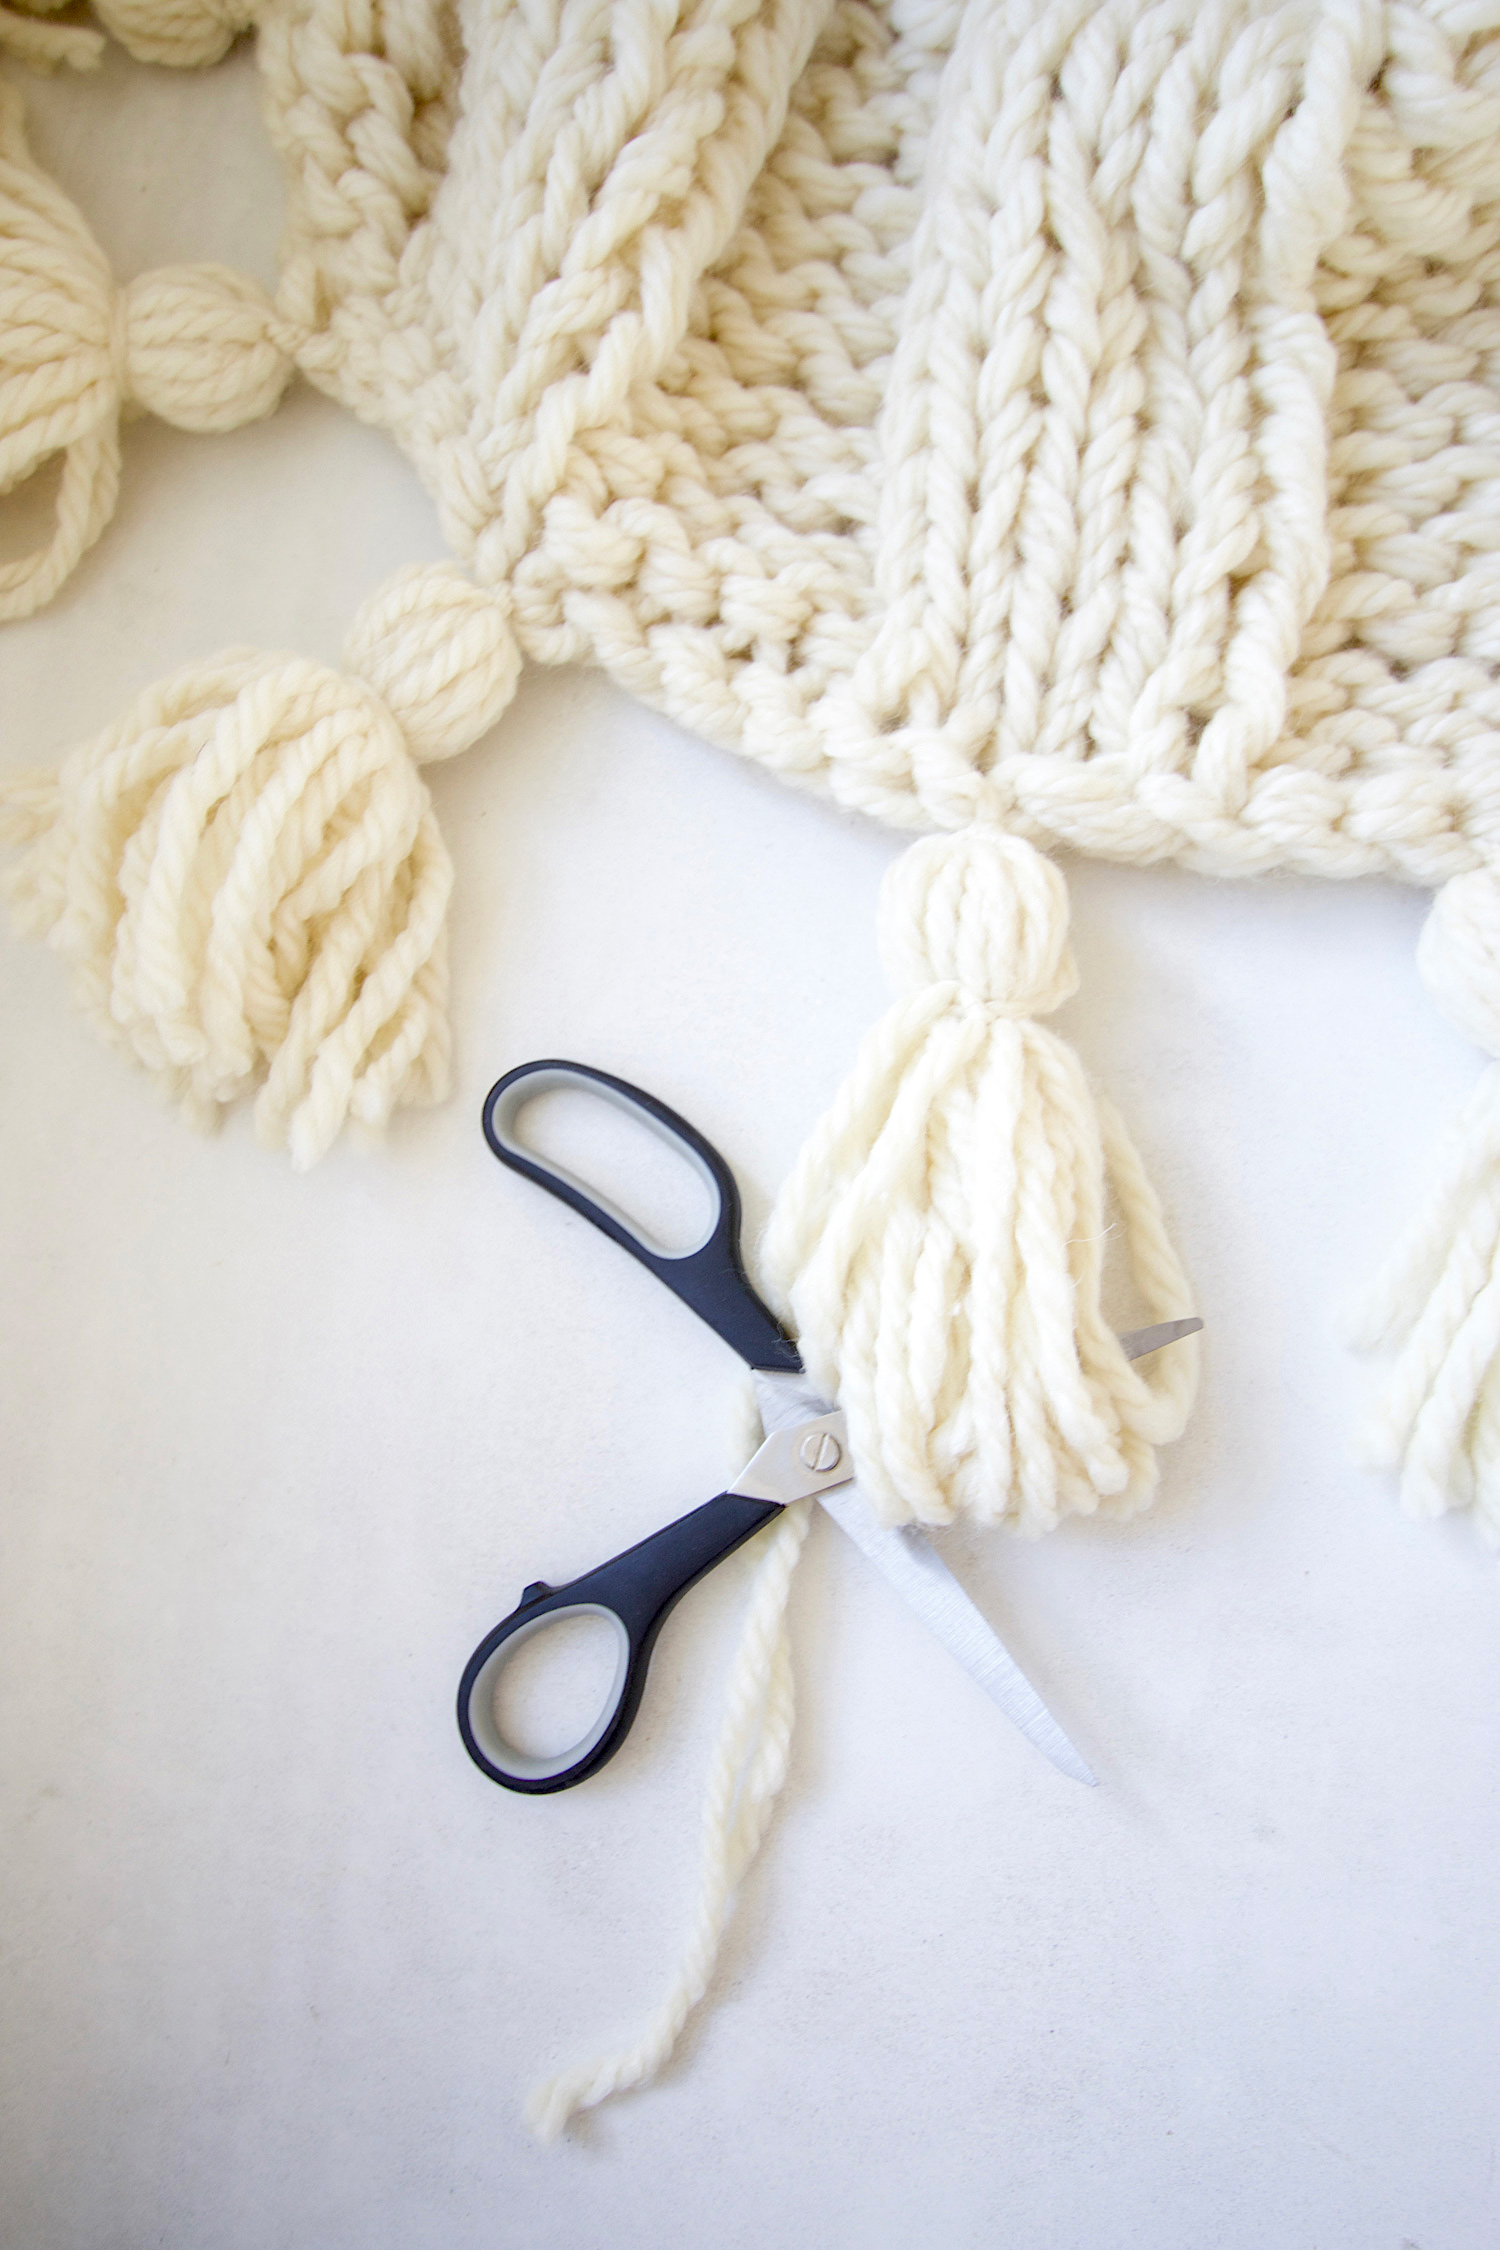 How to make wool tassels for your chunky knit blanket. A step by step